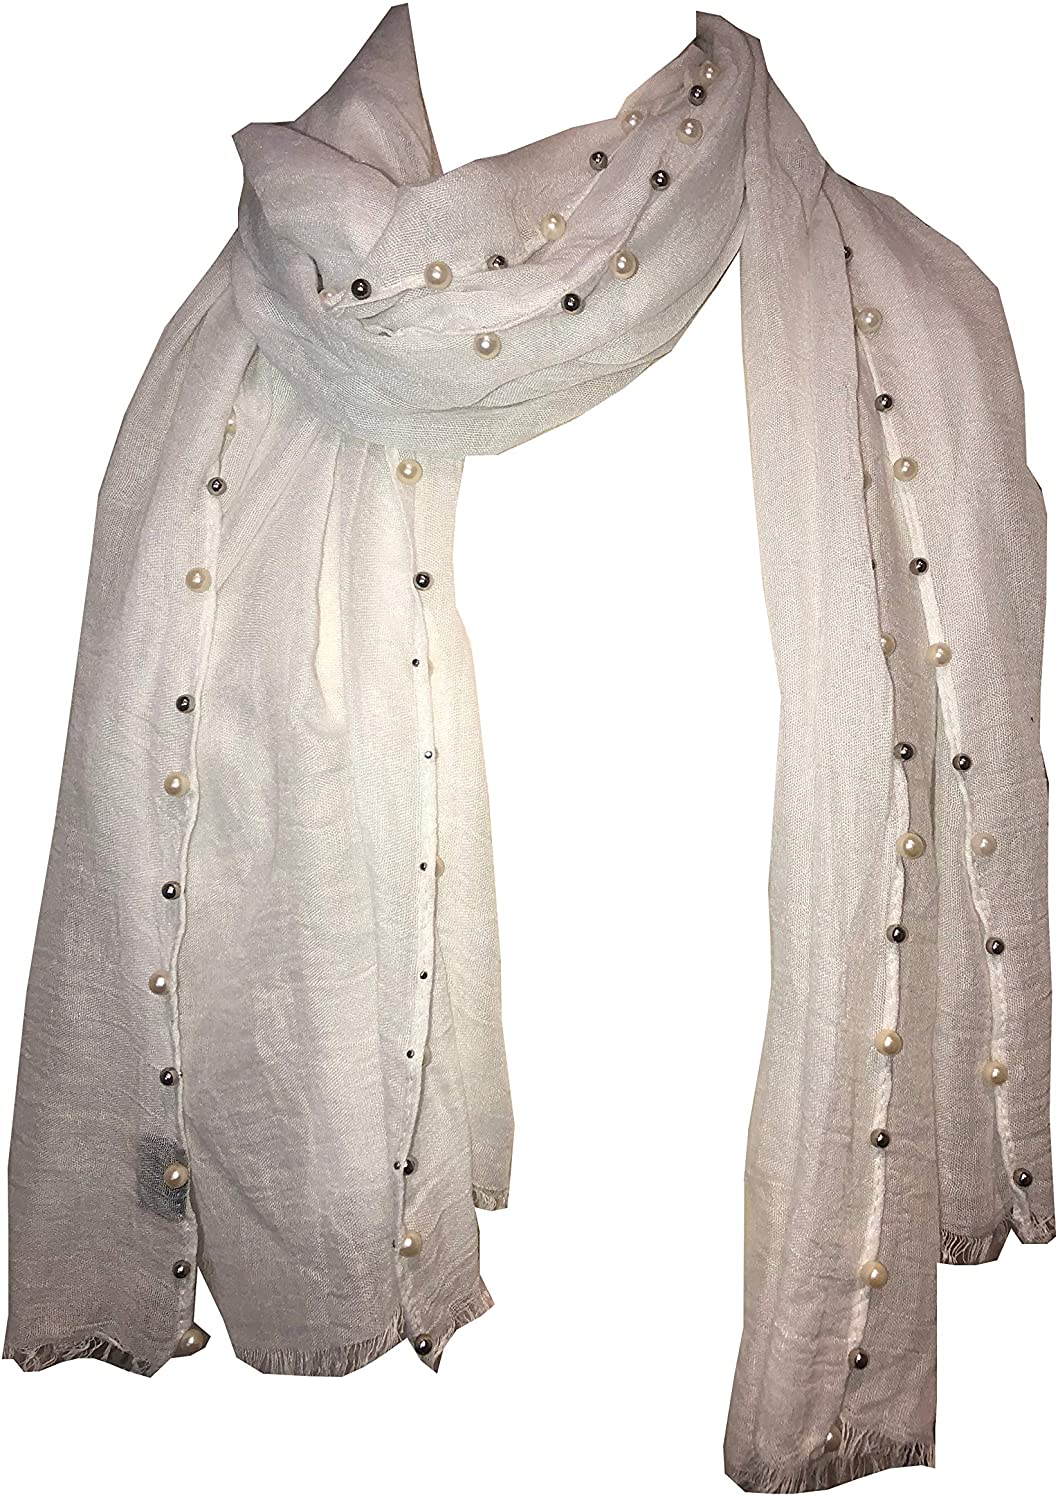 Pamper Yourself Now White with Beads and Pearls with Frayed Edge Long Soft Scarf/wrap